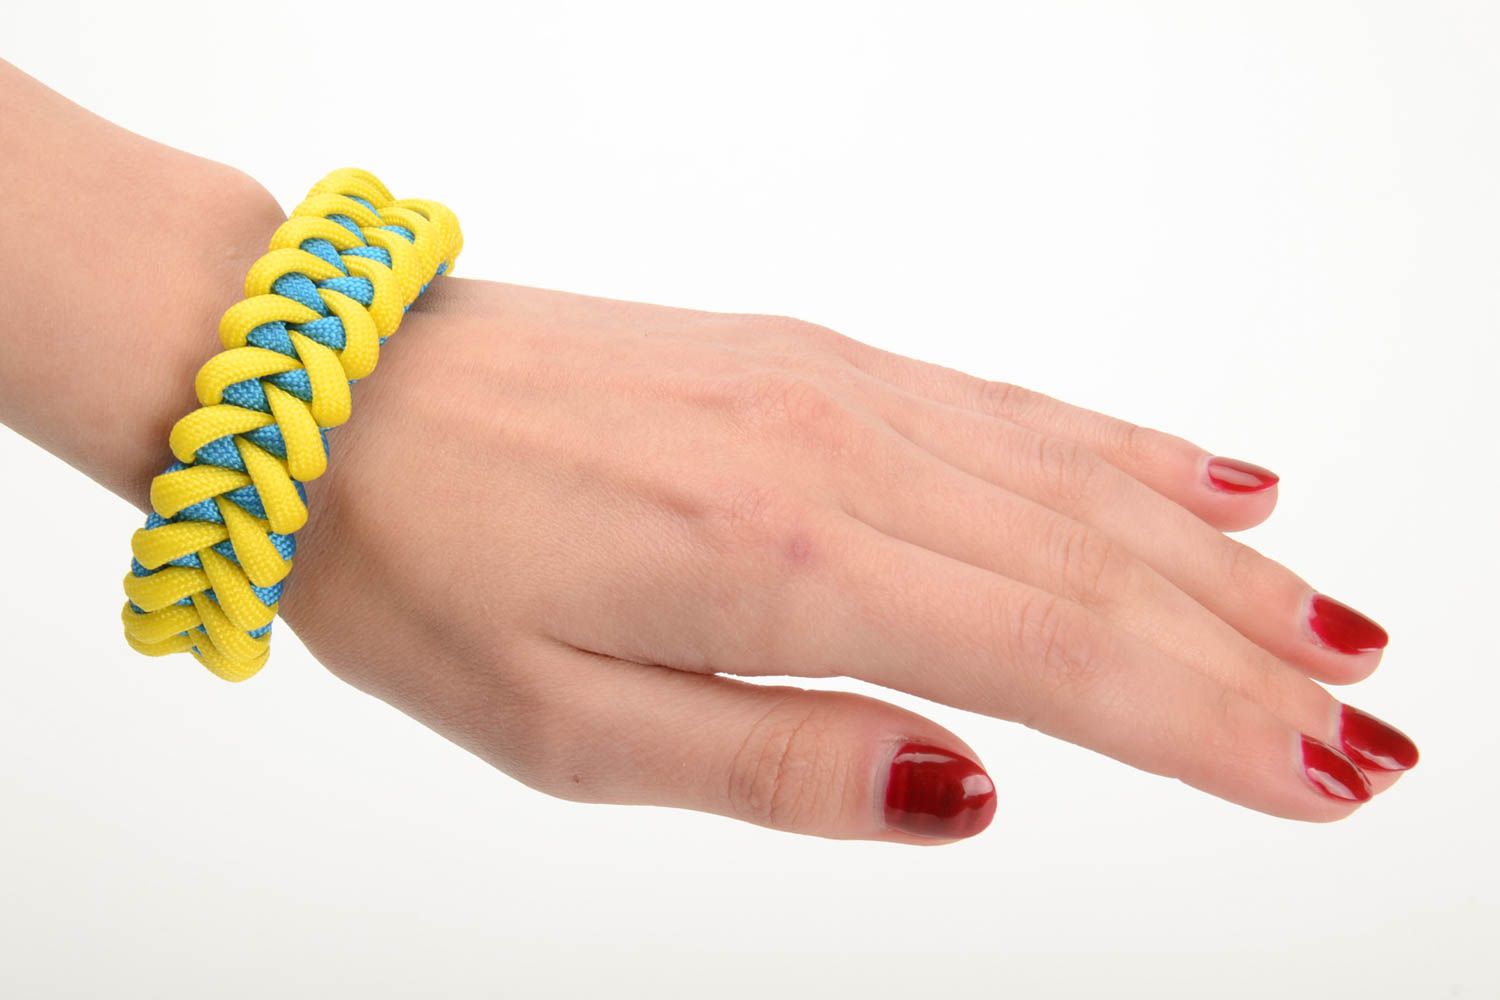 Handmade wrist survival bracelet woven of yellow and blue parachute cords photo 5